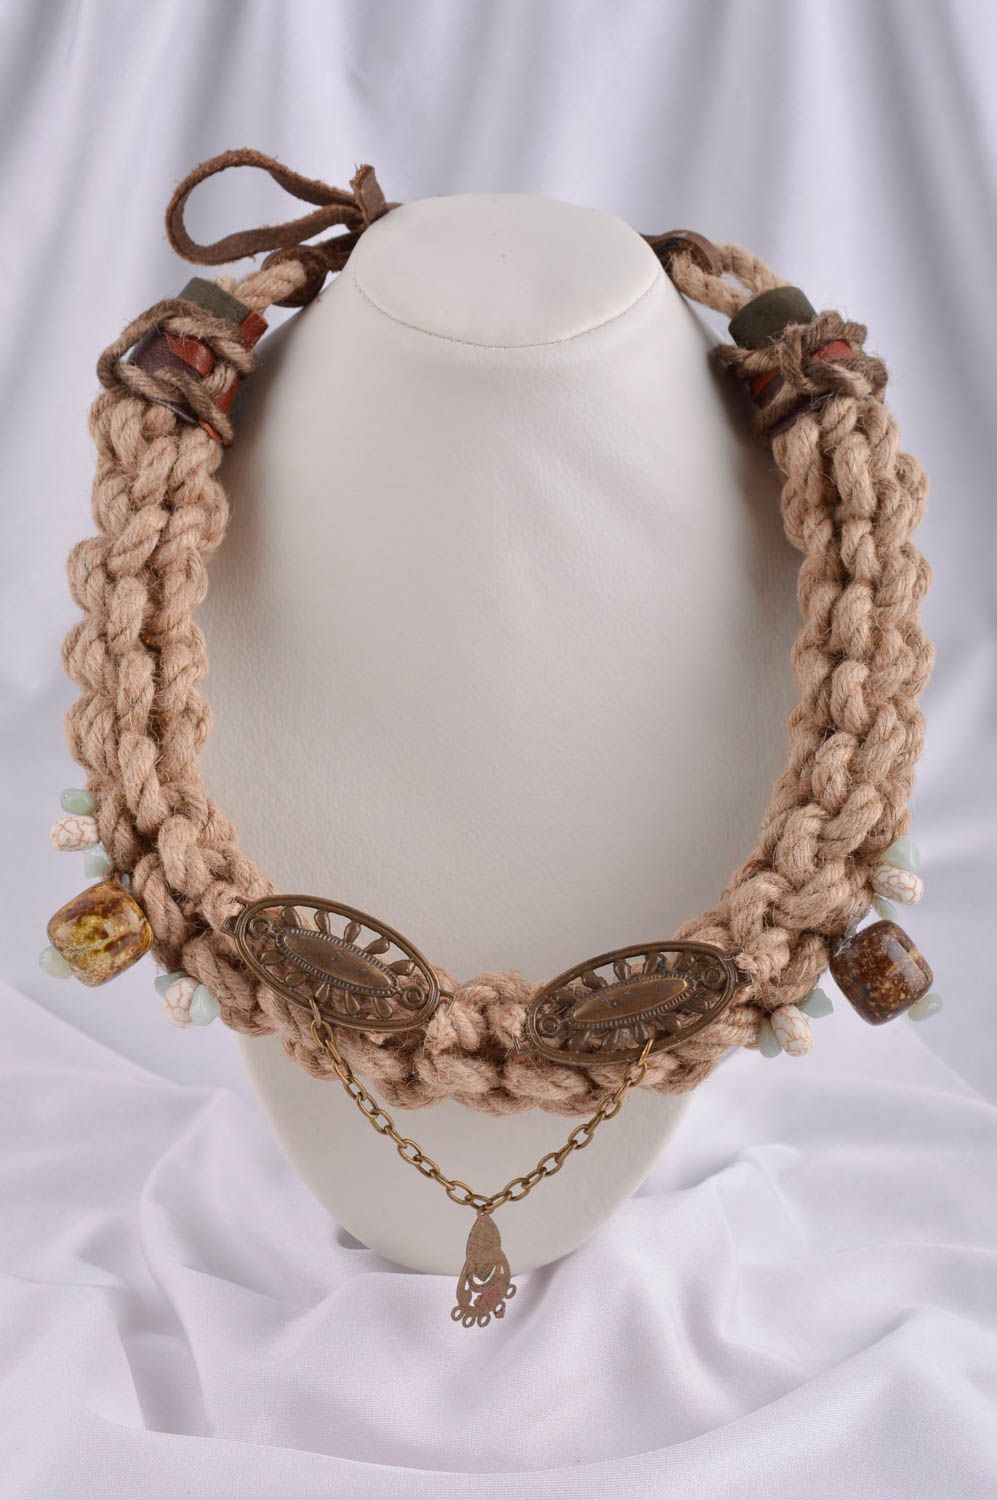 Woven necklace with natural stones handmade cord necklace designer accessories photo 1